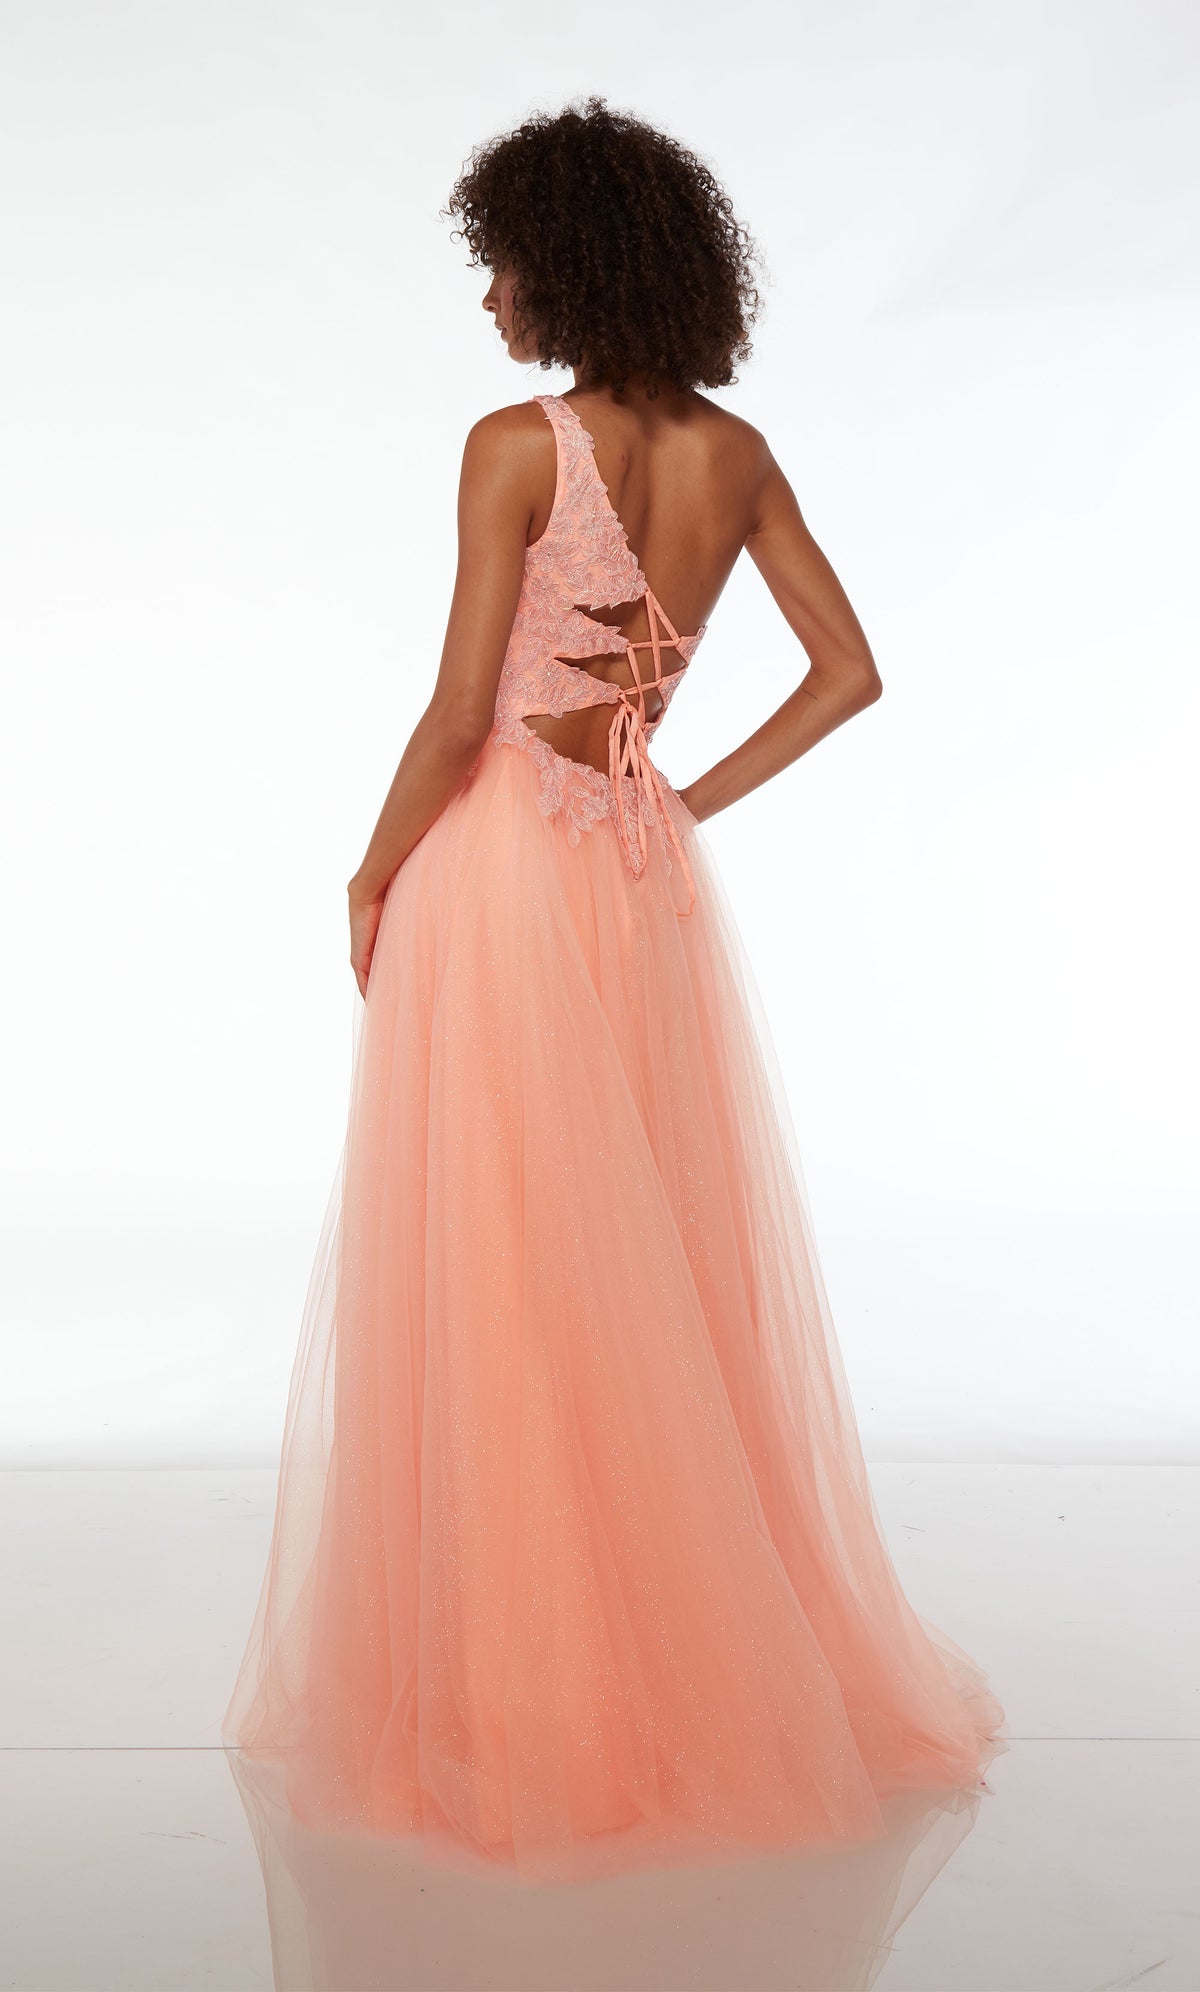 Neon coral colored one-shoulder prom dress: lace bodice, glitter tulle skirt, high slit, and lace-up back for the perfect fit and an stylish, elegant look.